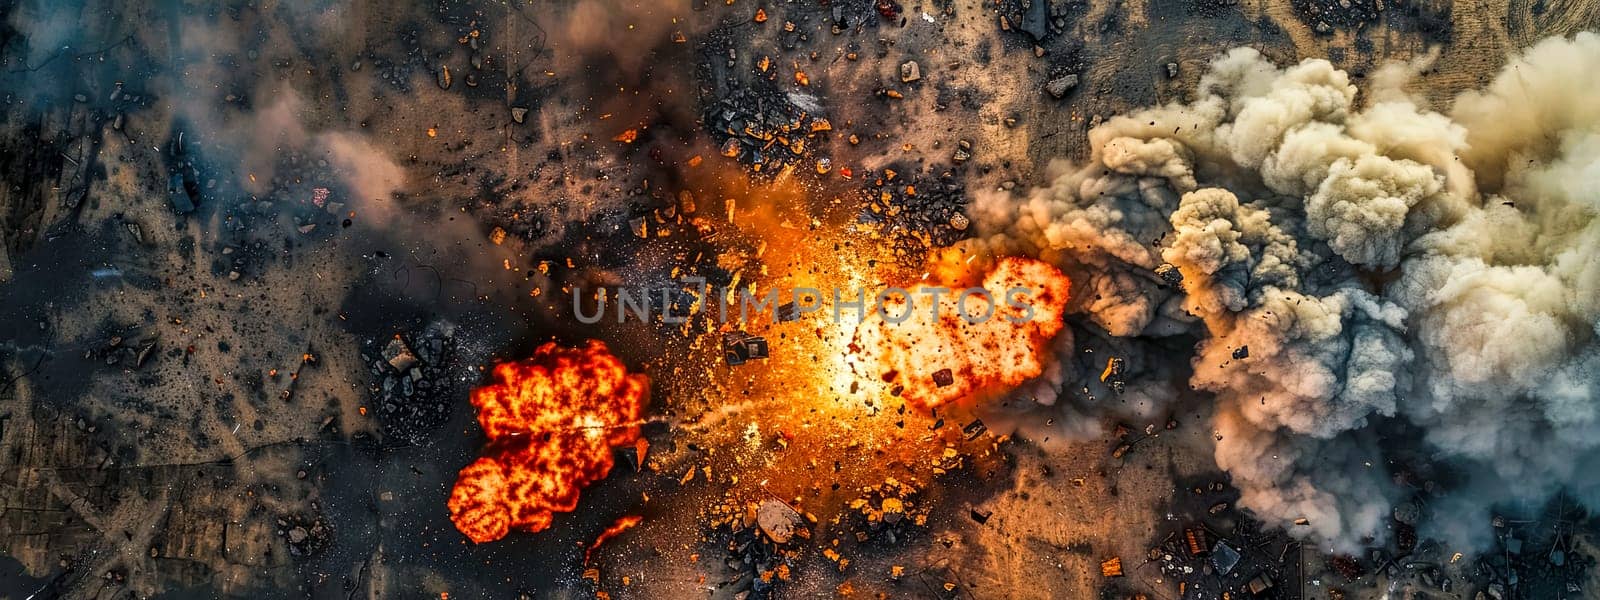 Aerial image of a huge explosion with intense flames and smoke on the ground